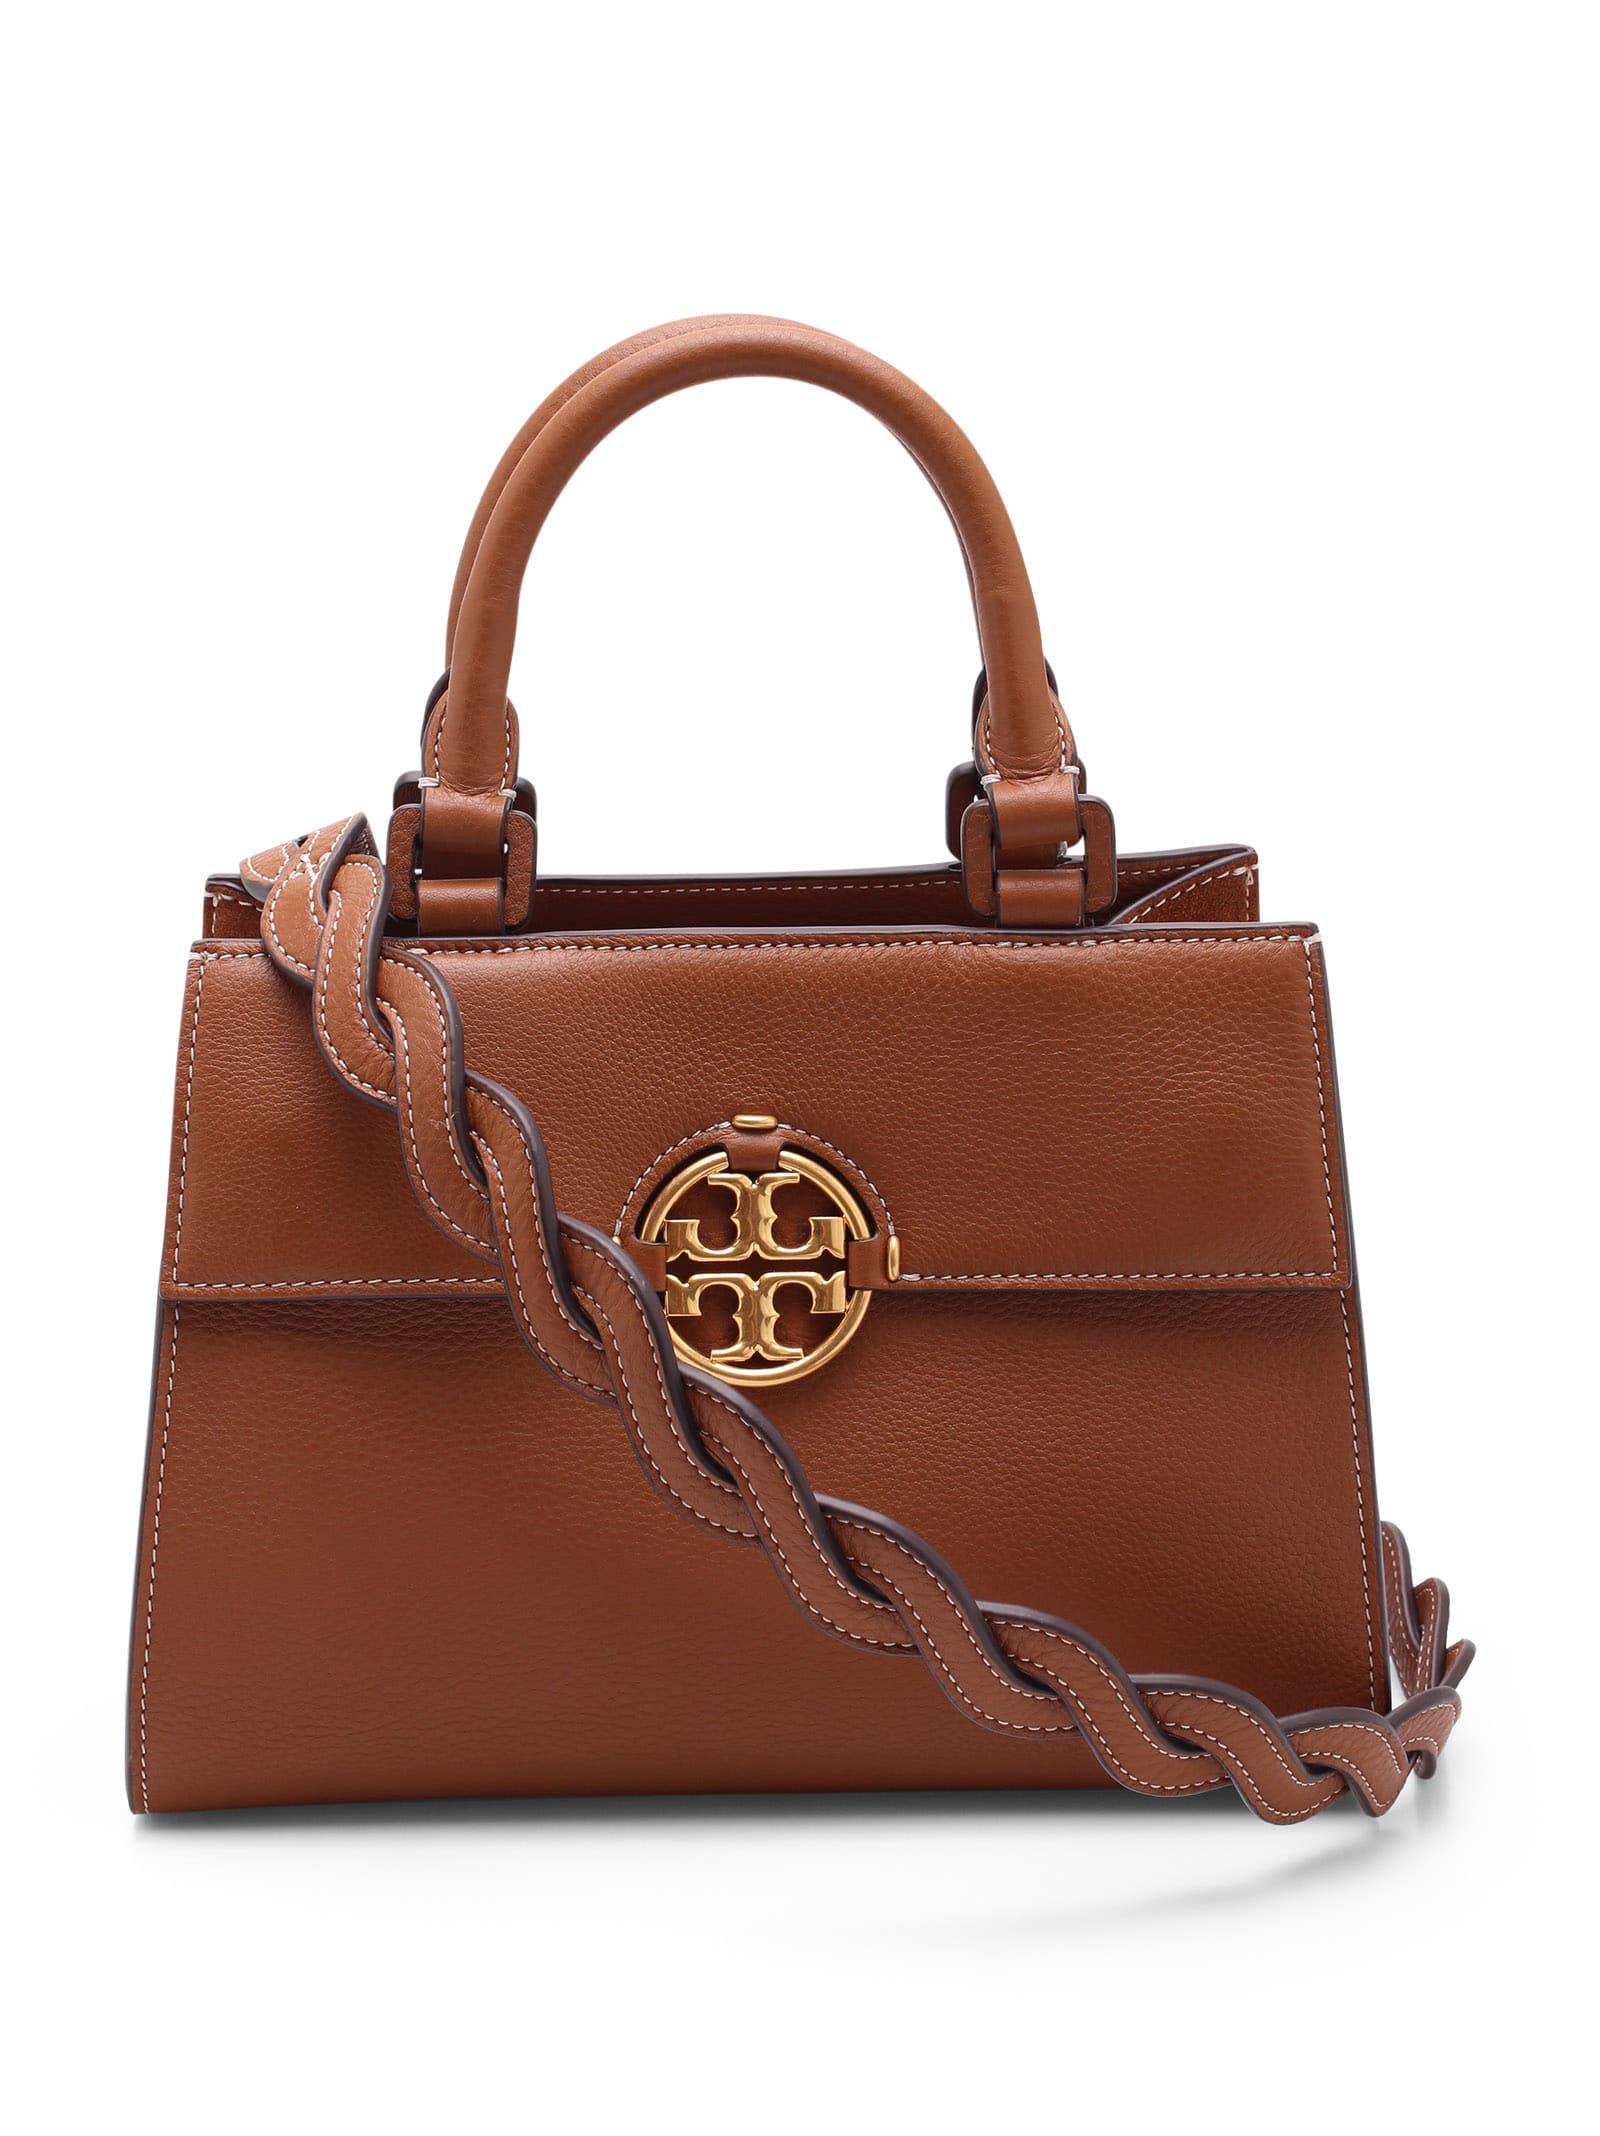 Tory Burch Miller Leather Tote Bag In Brown